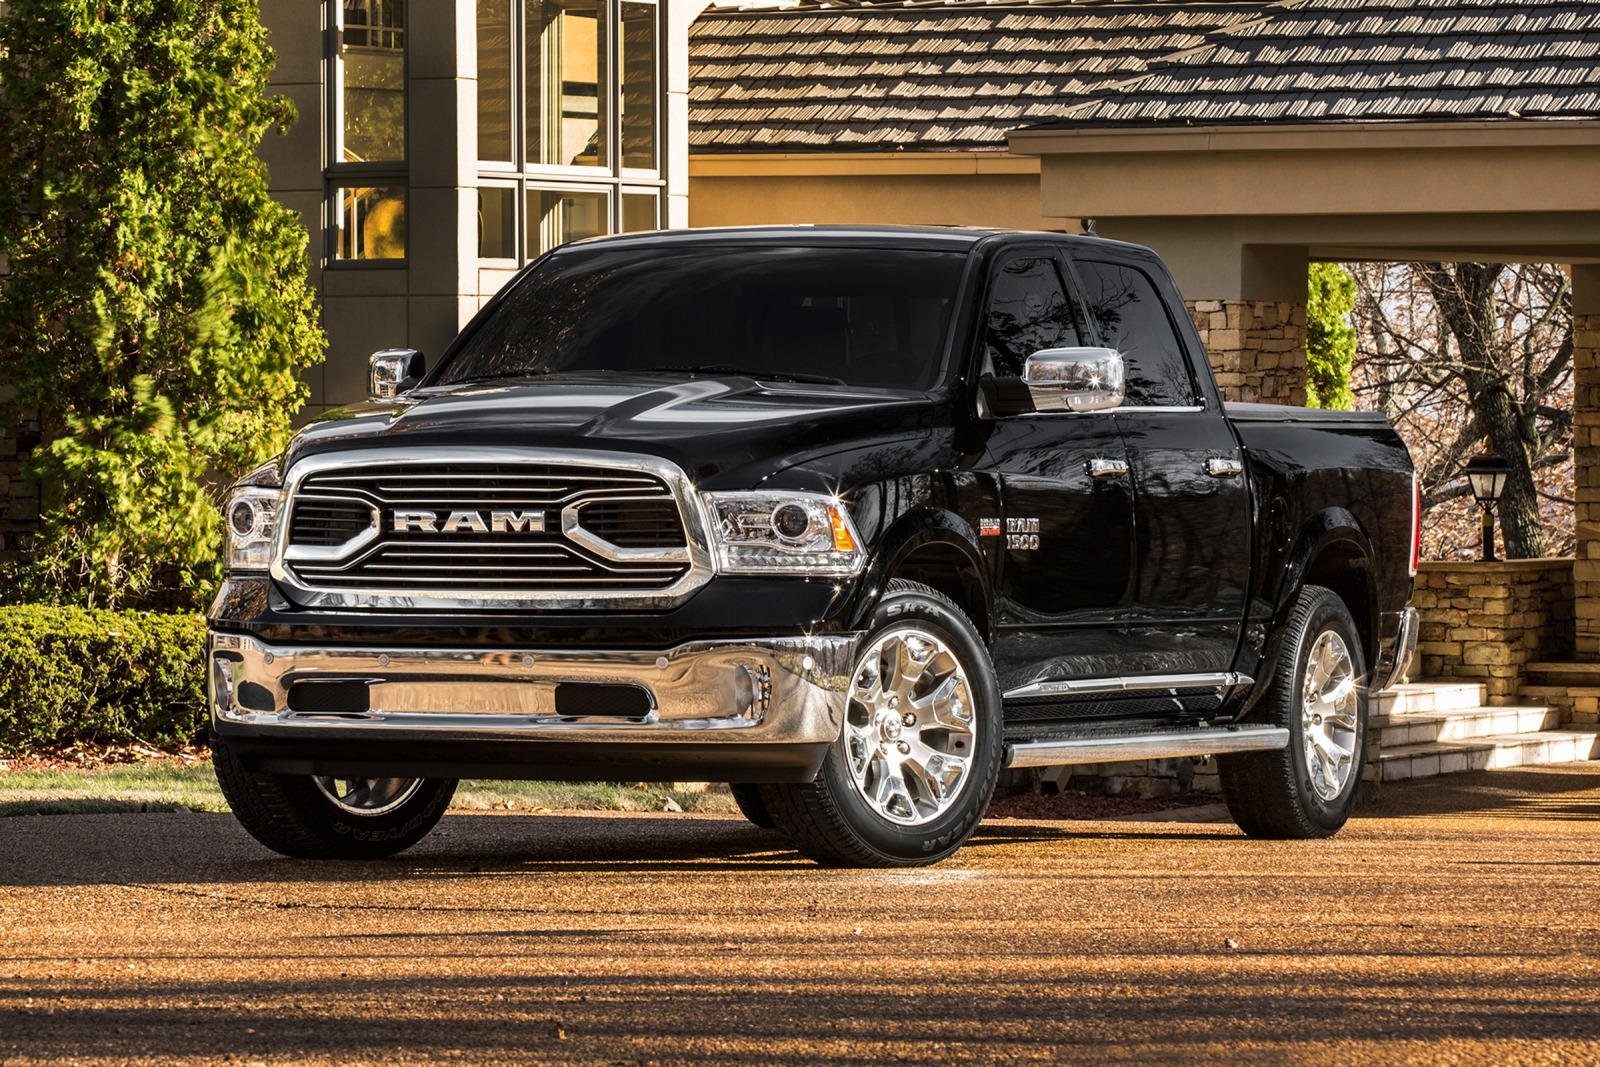 2013 Ram 1500 Front Angle View